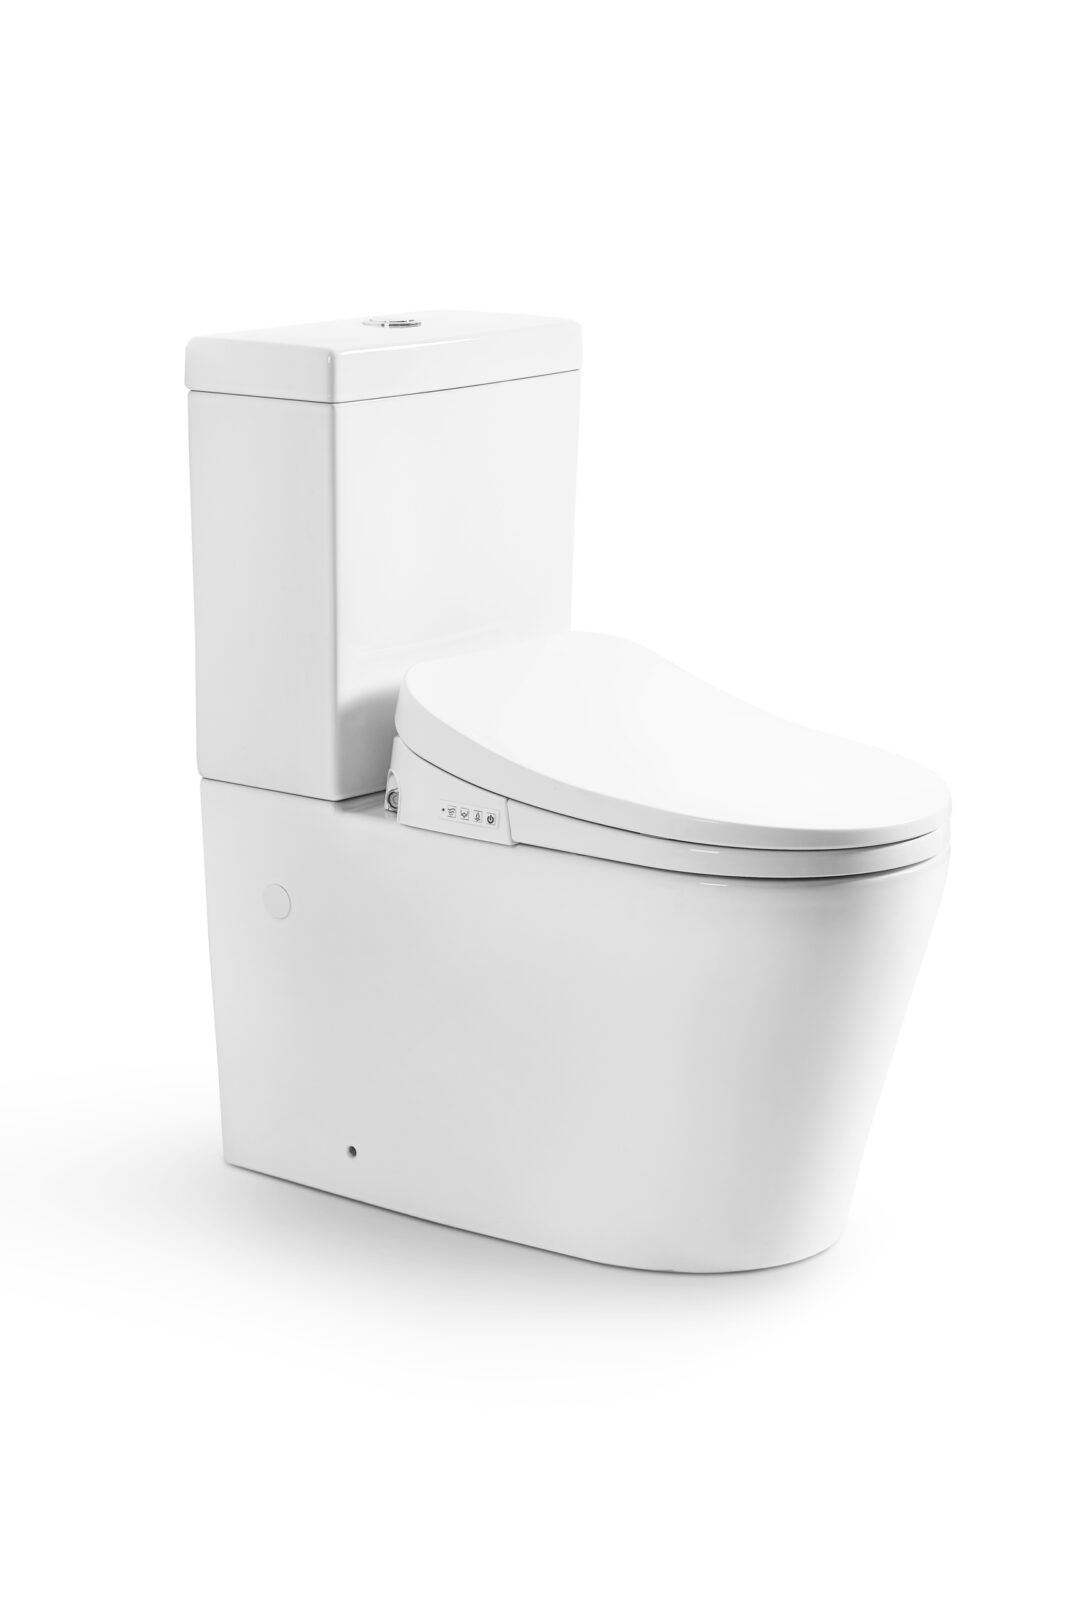 STELLA Smart Toilet Suite with Electric Bidet Seat